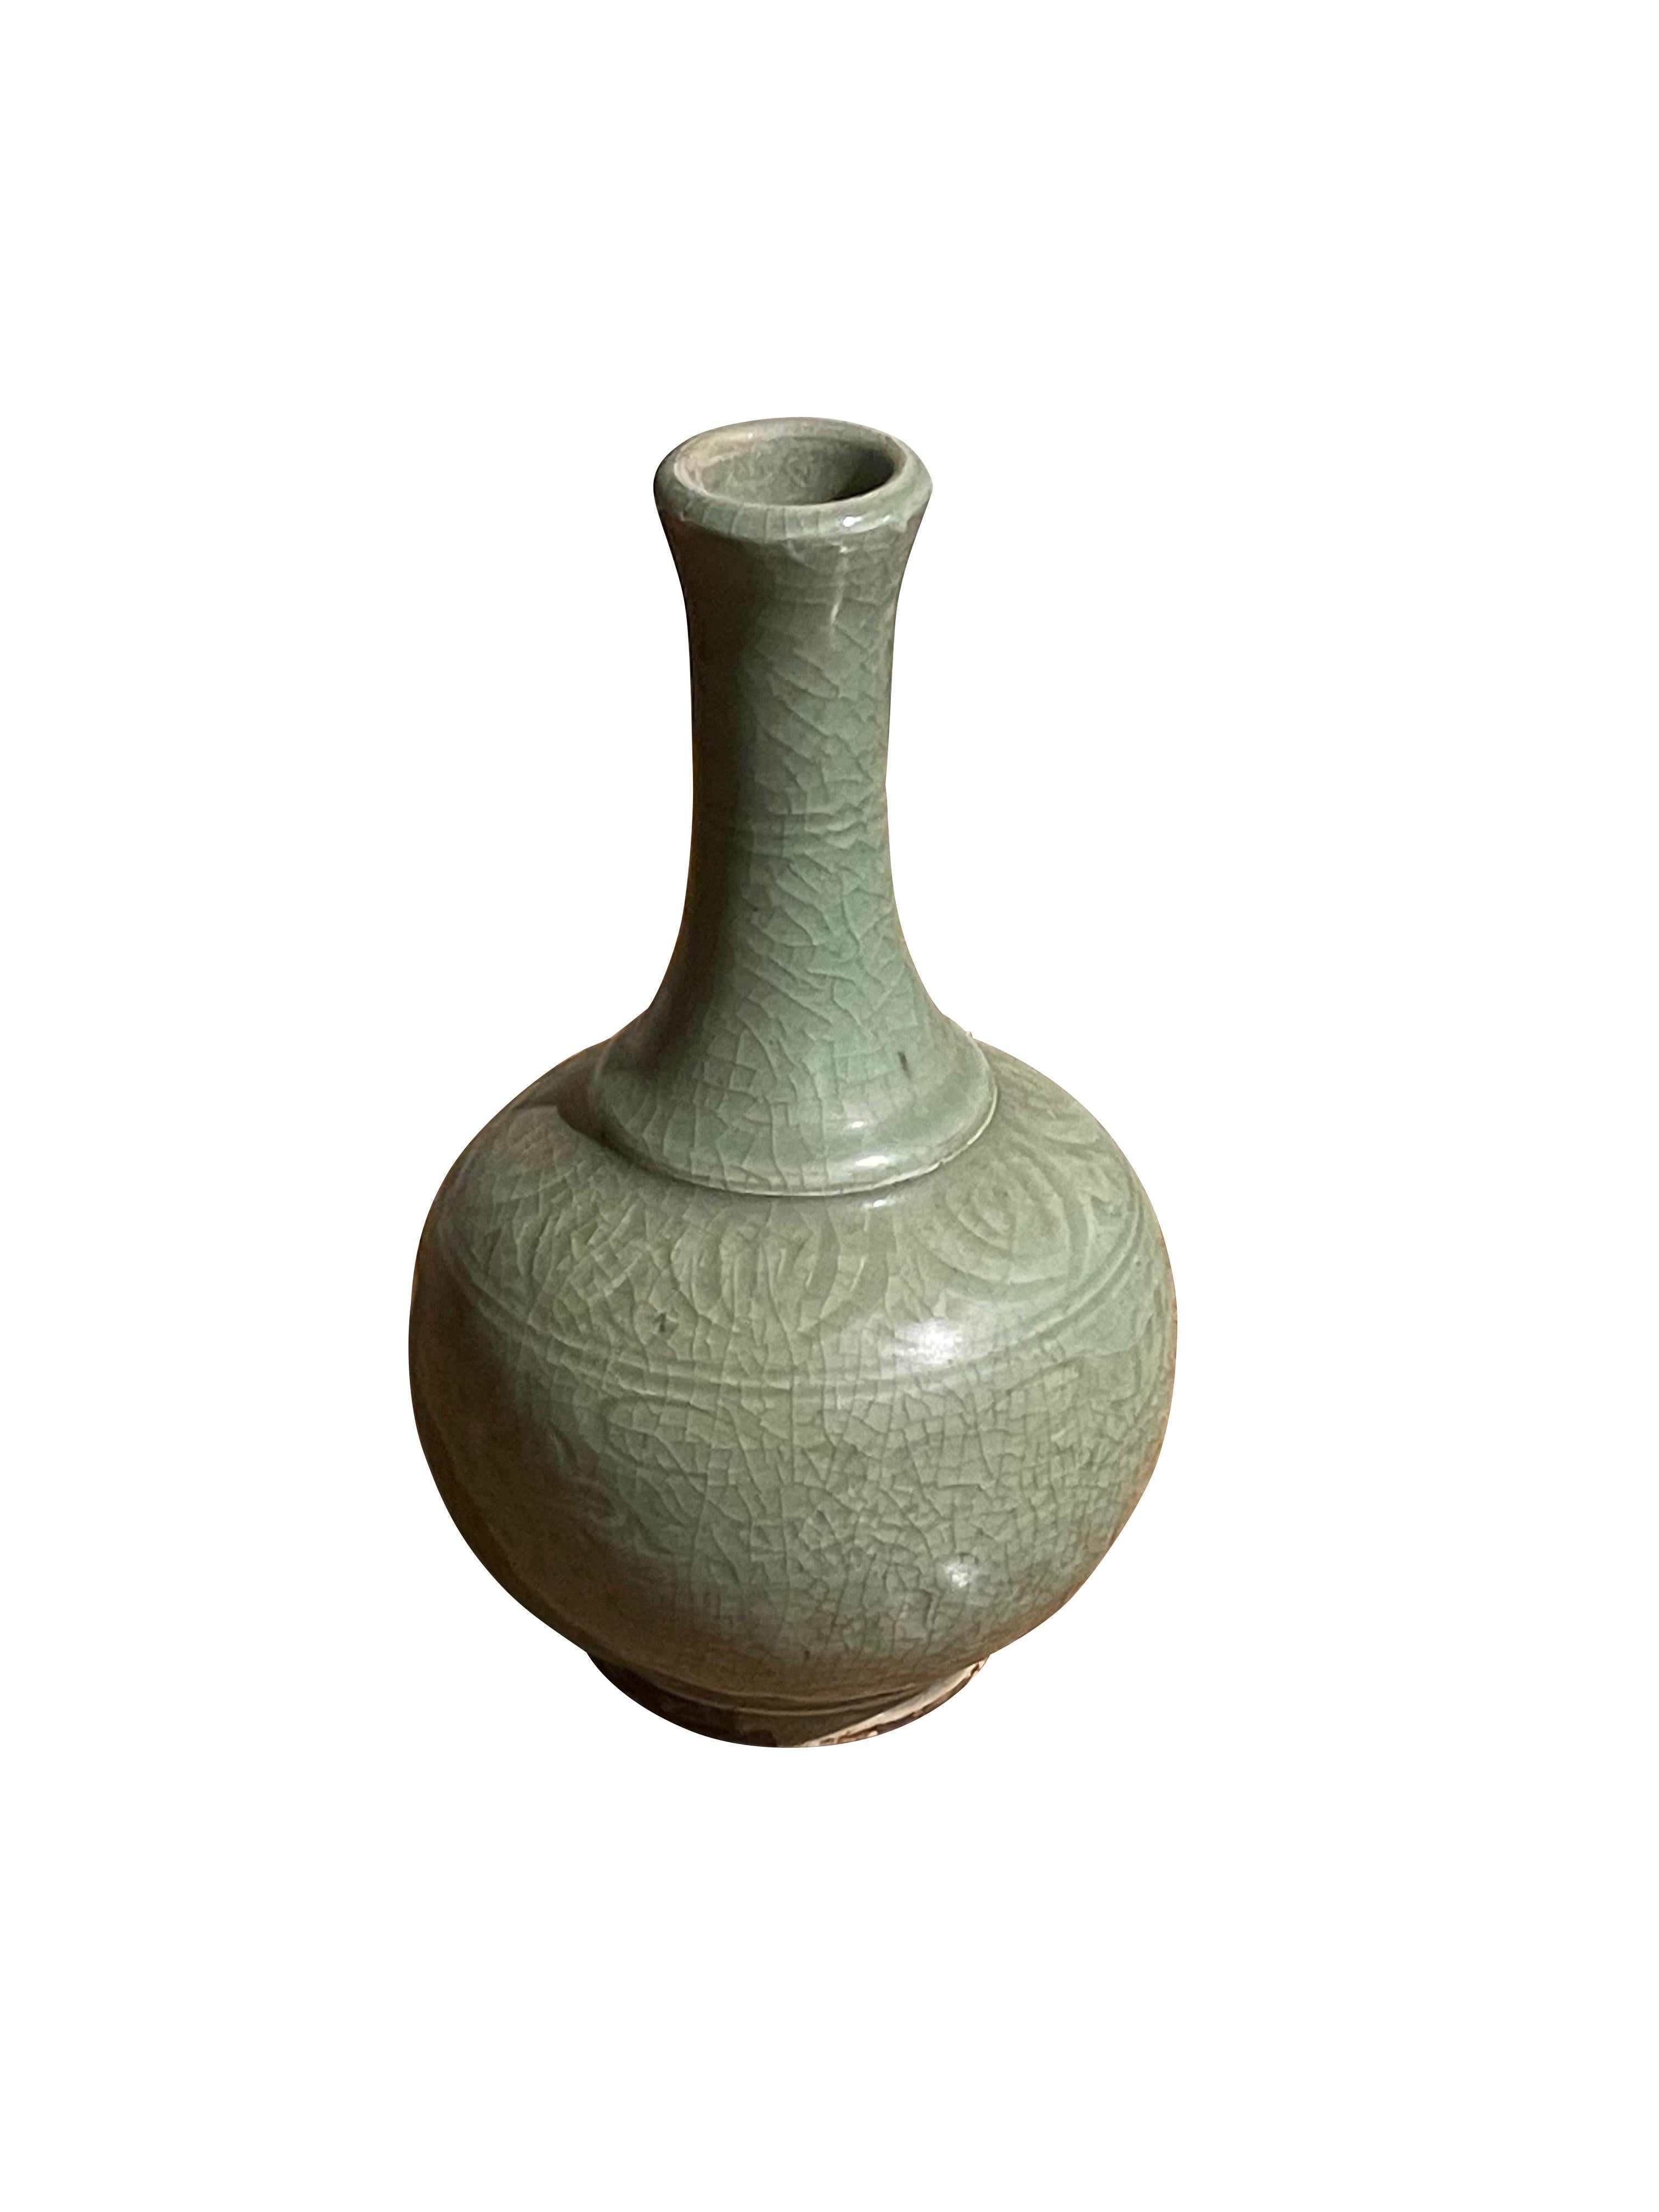 Contemporary Chinese pale celadon vase with decorative surface pattern.
Crackle finish glaze.
Slender neck with small opening.
Rounded base design.
From a large collection.
ARRIVING MARCH